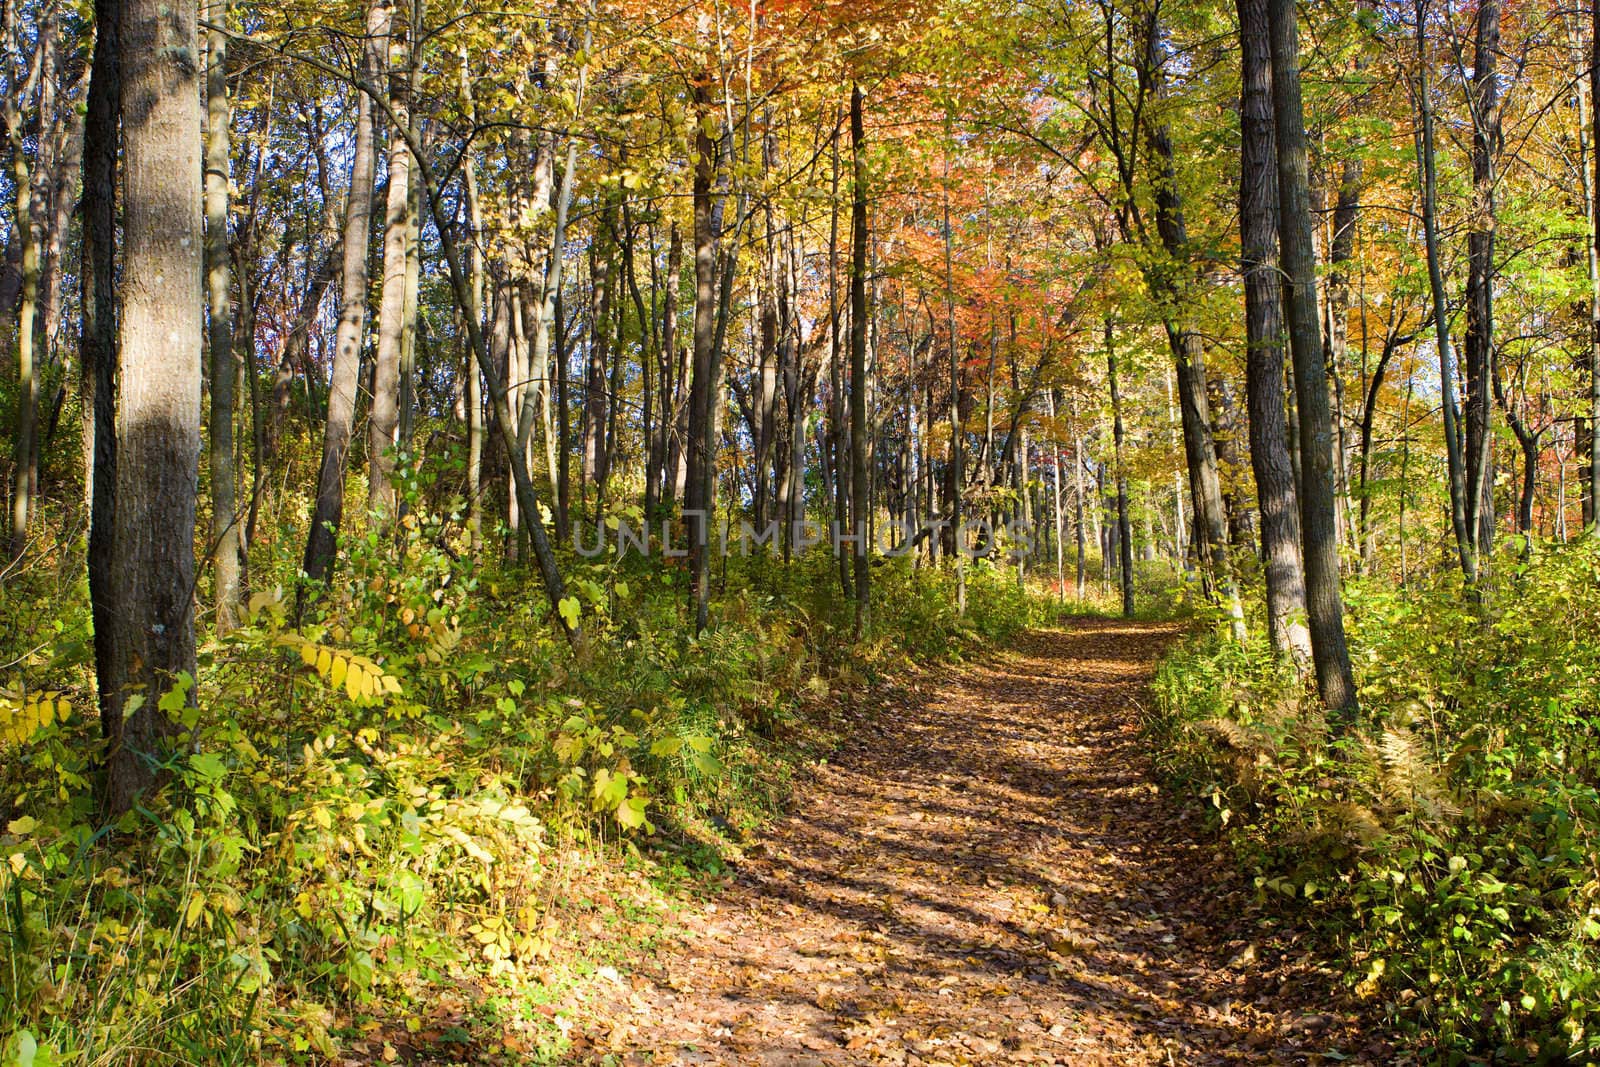 A walk down this path to see the great fall colors.